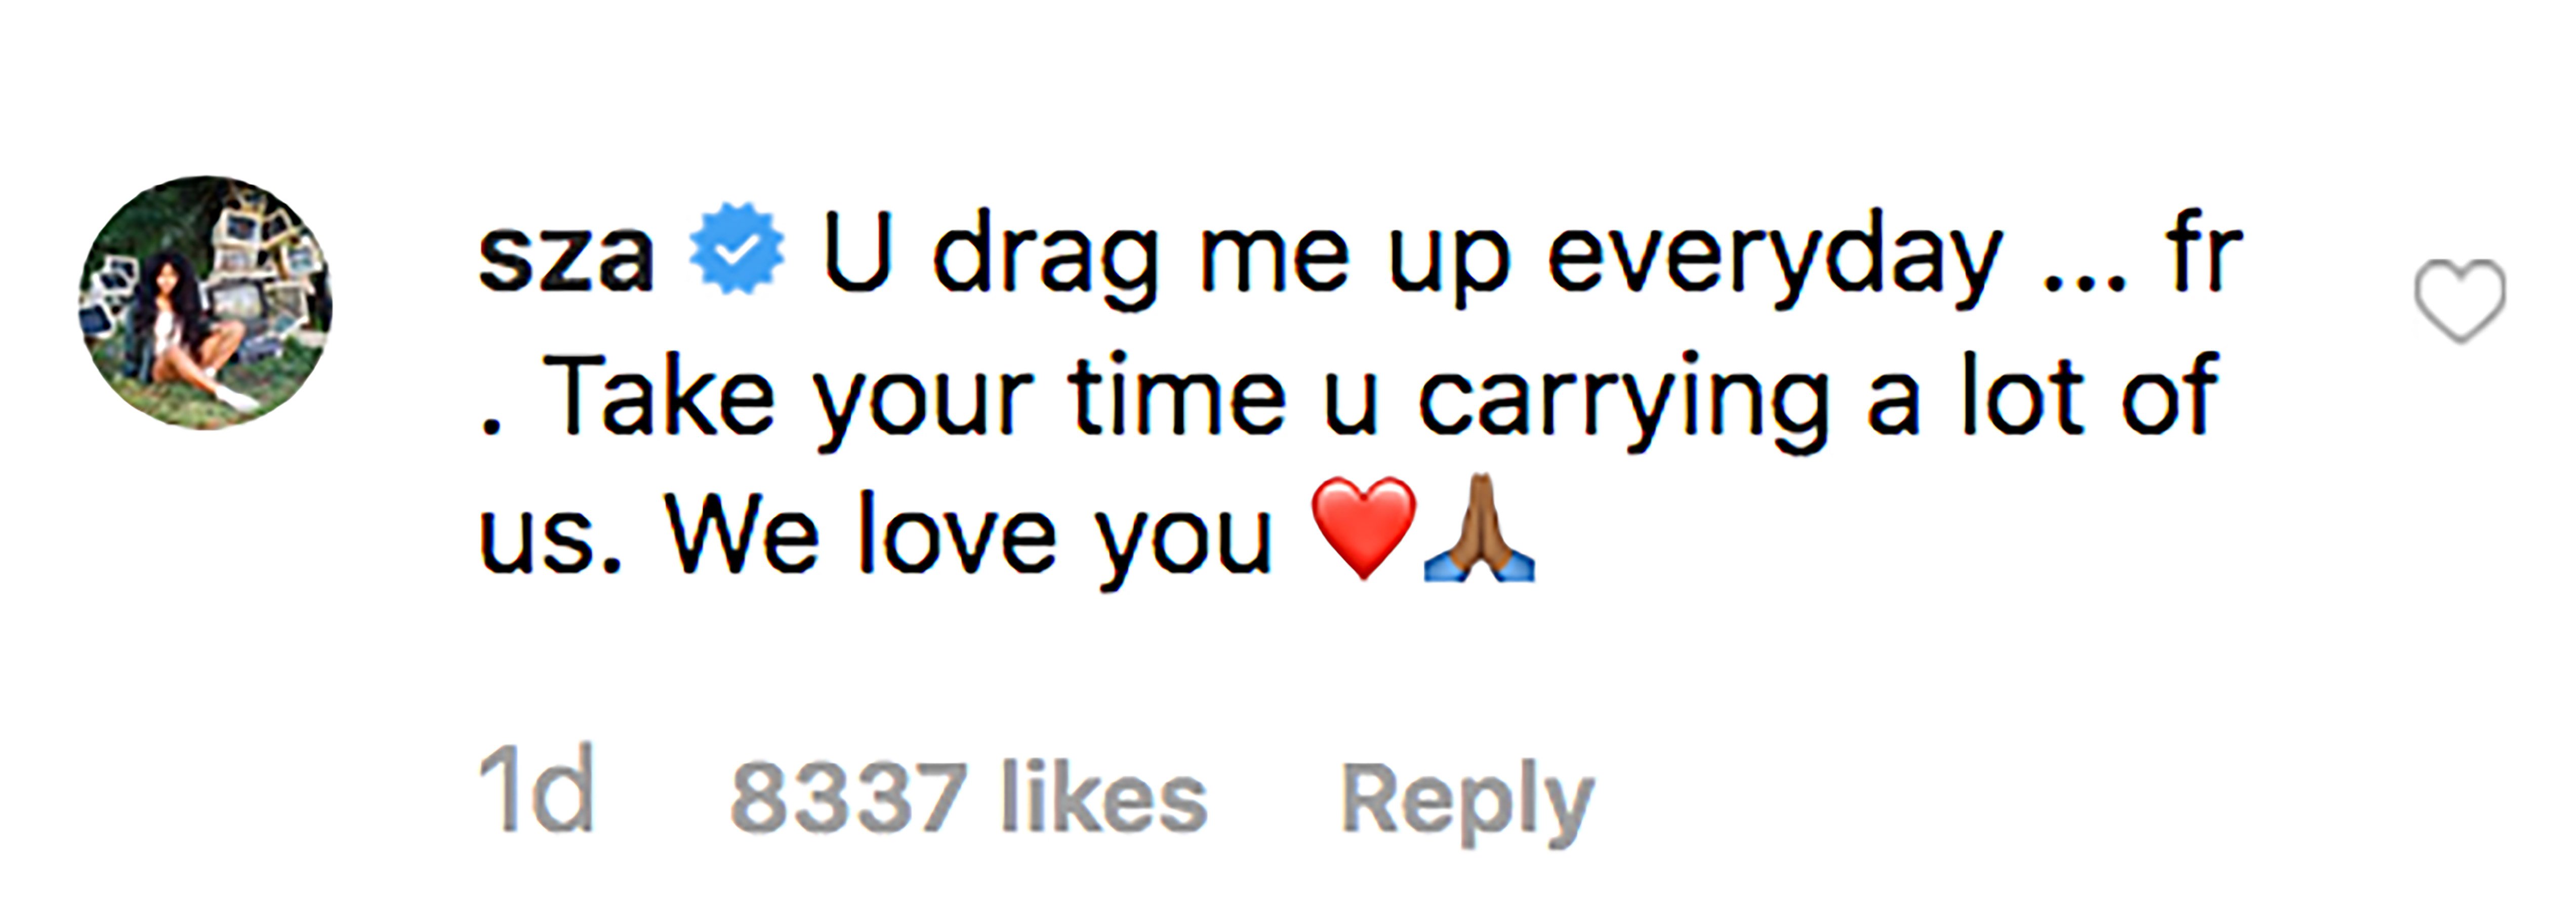 SZA comment on Lizzo's post. | Source: Instagram/lizzobeeating